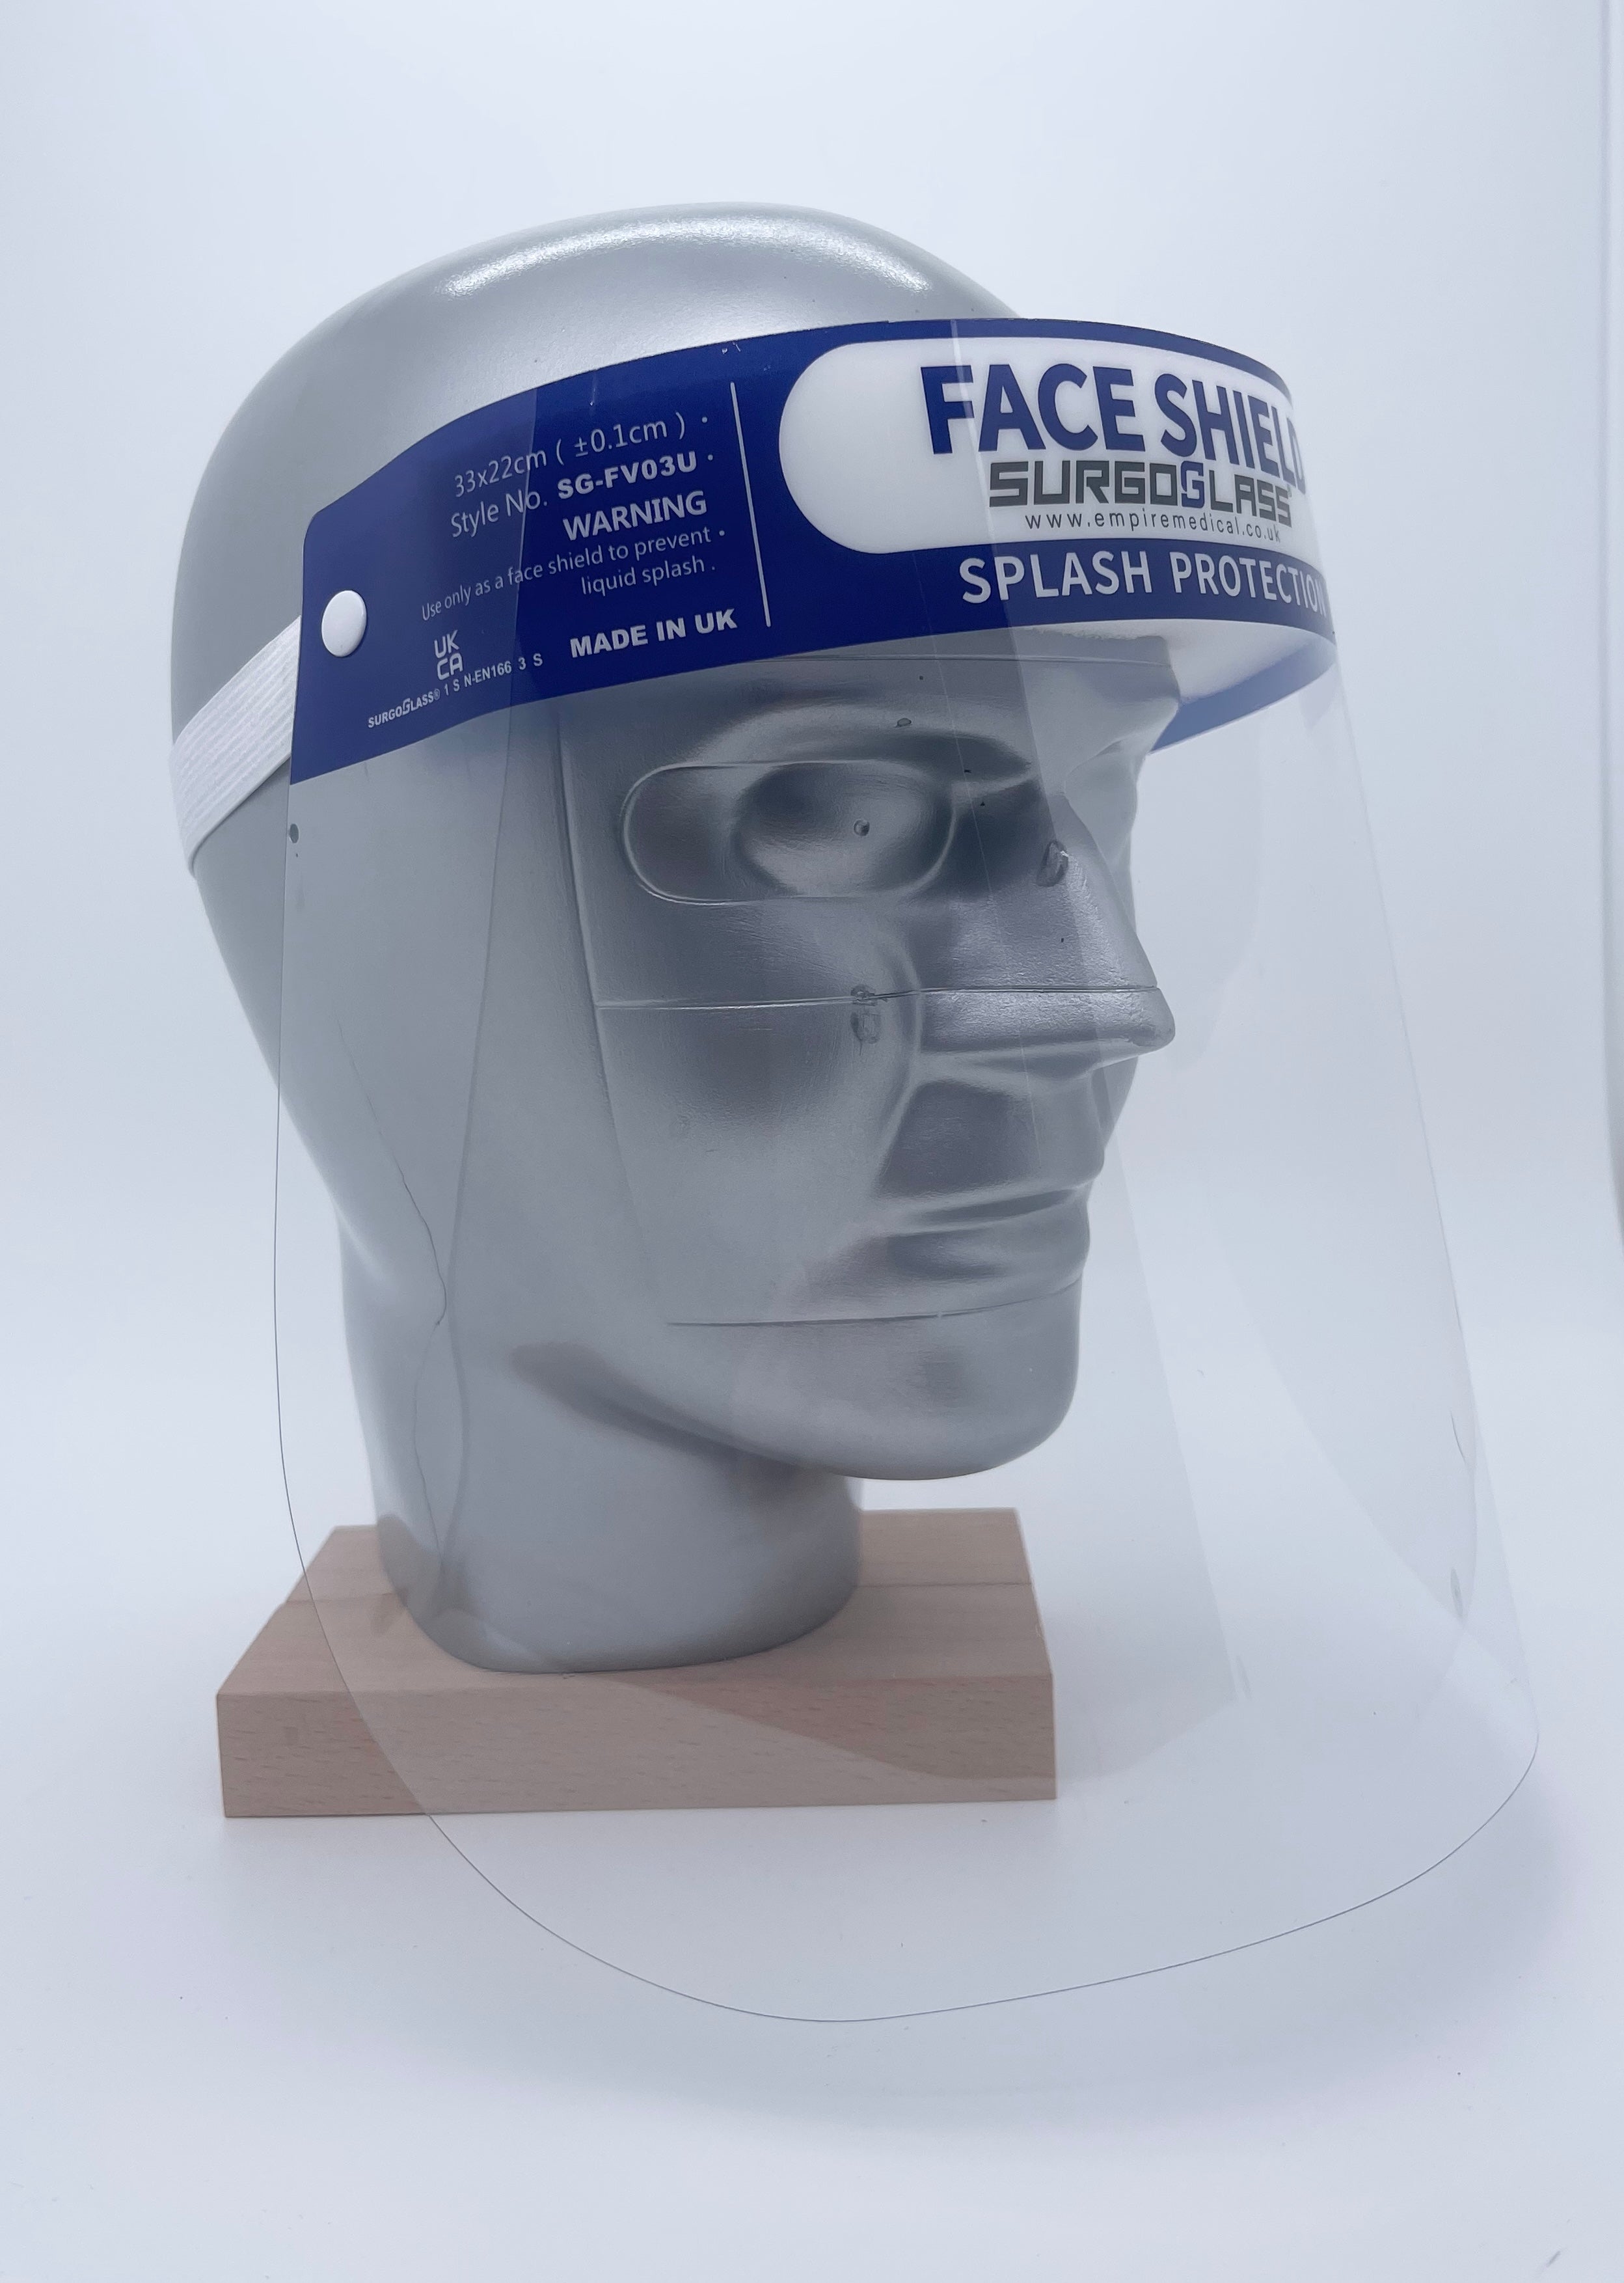 Box 200 EN166 PET Full Face Cover Face Shield Visor Anti Fog with Elastic Adjustable Band Direct Splash Protection Premium Glass Double sided protective films individually wrapped Universal Size LATEX FREE UKCA Marked